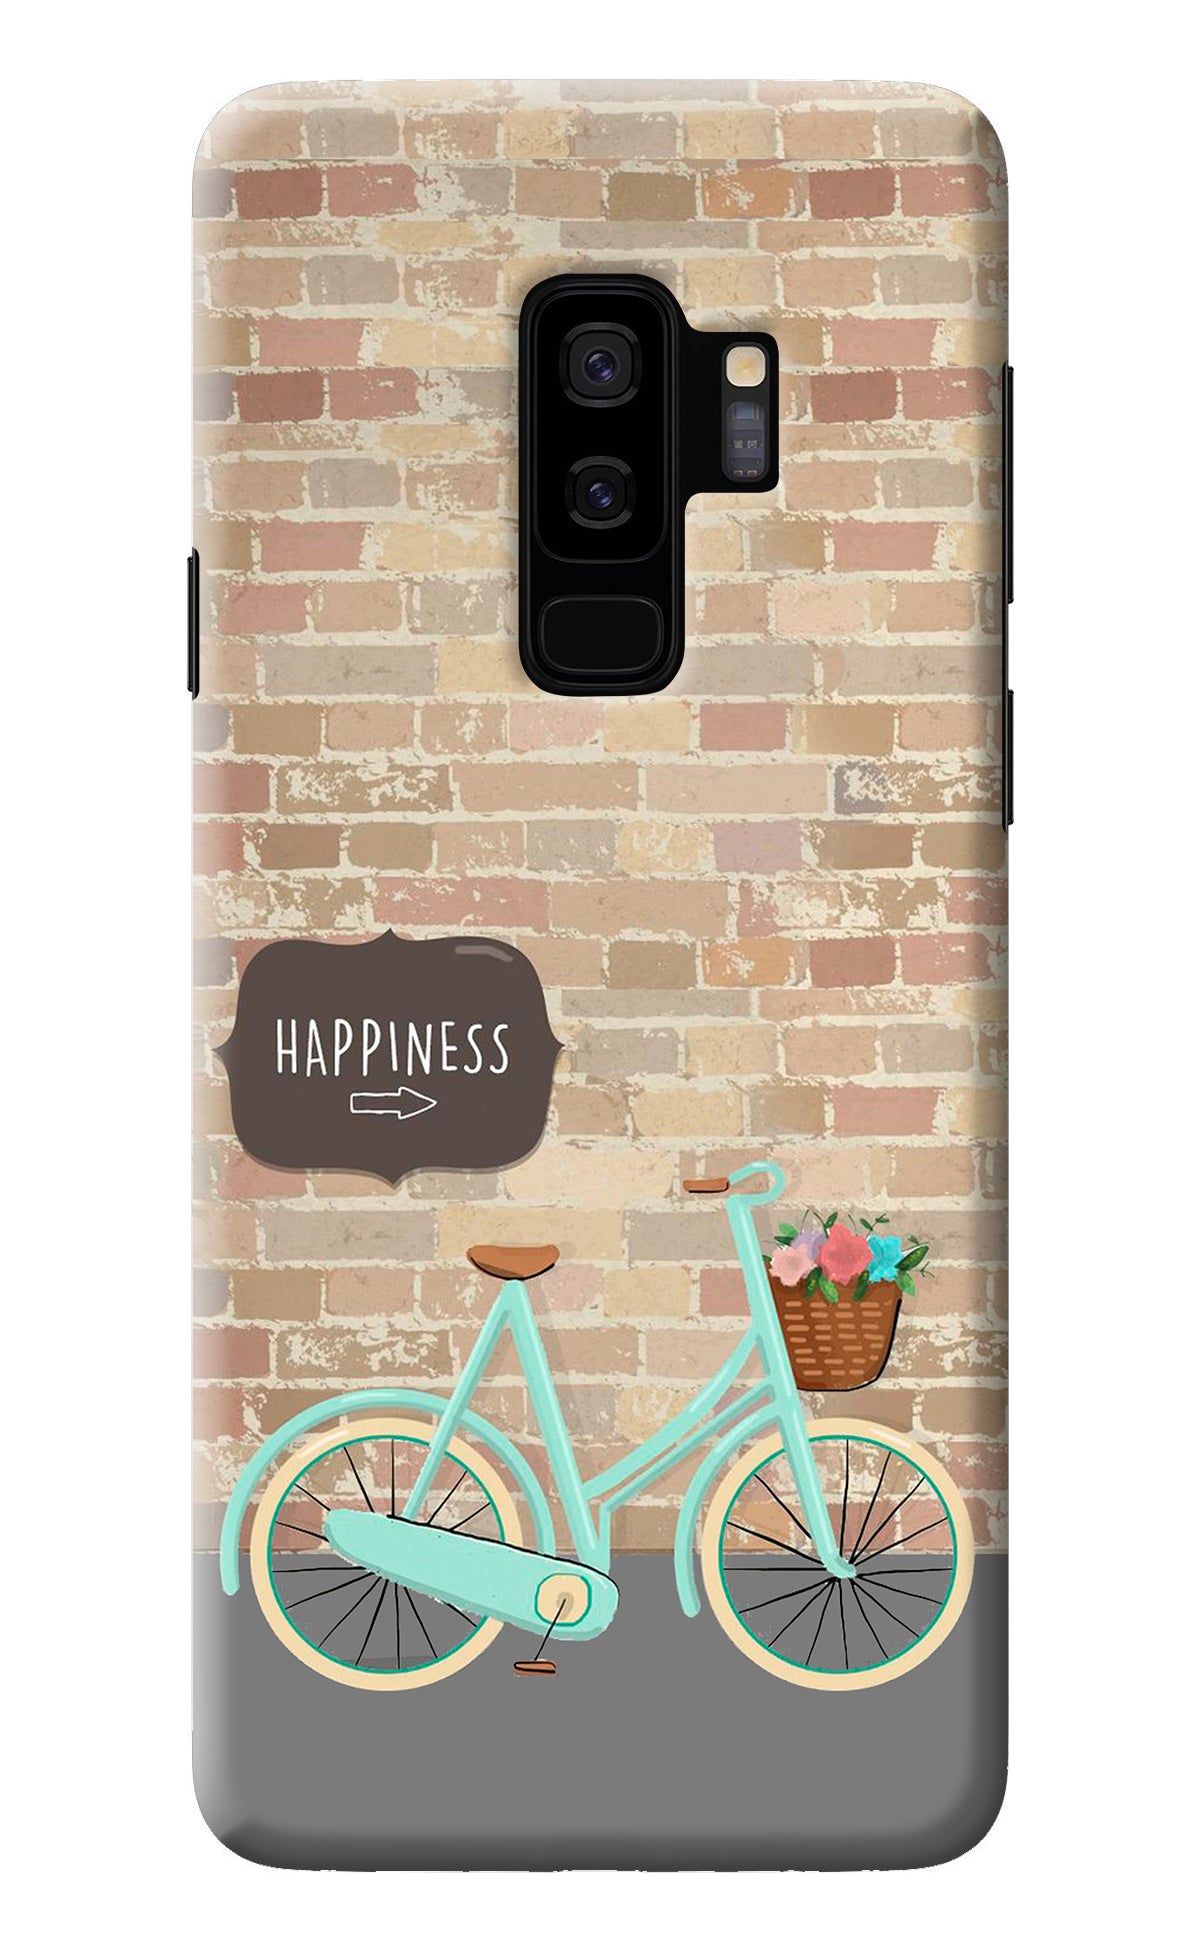 Happiness Artwork Samsung S9 Plus Back Cover